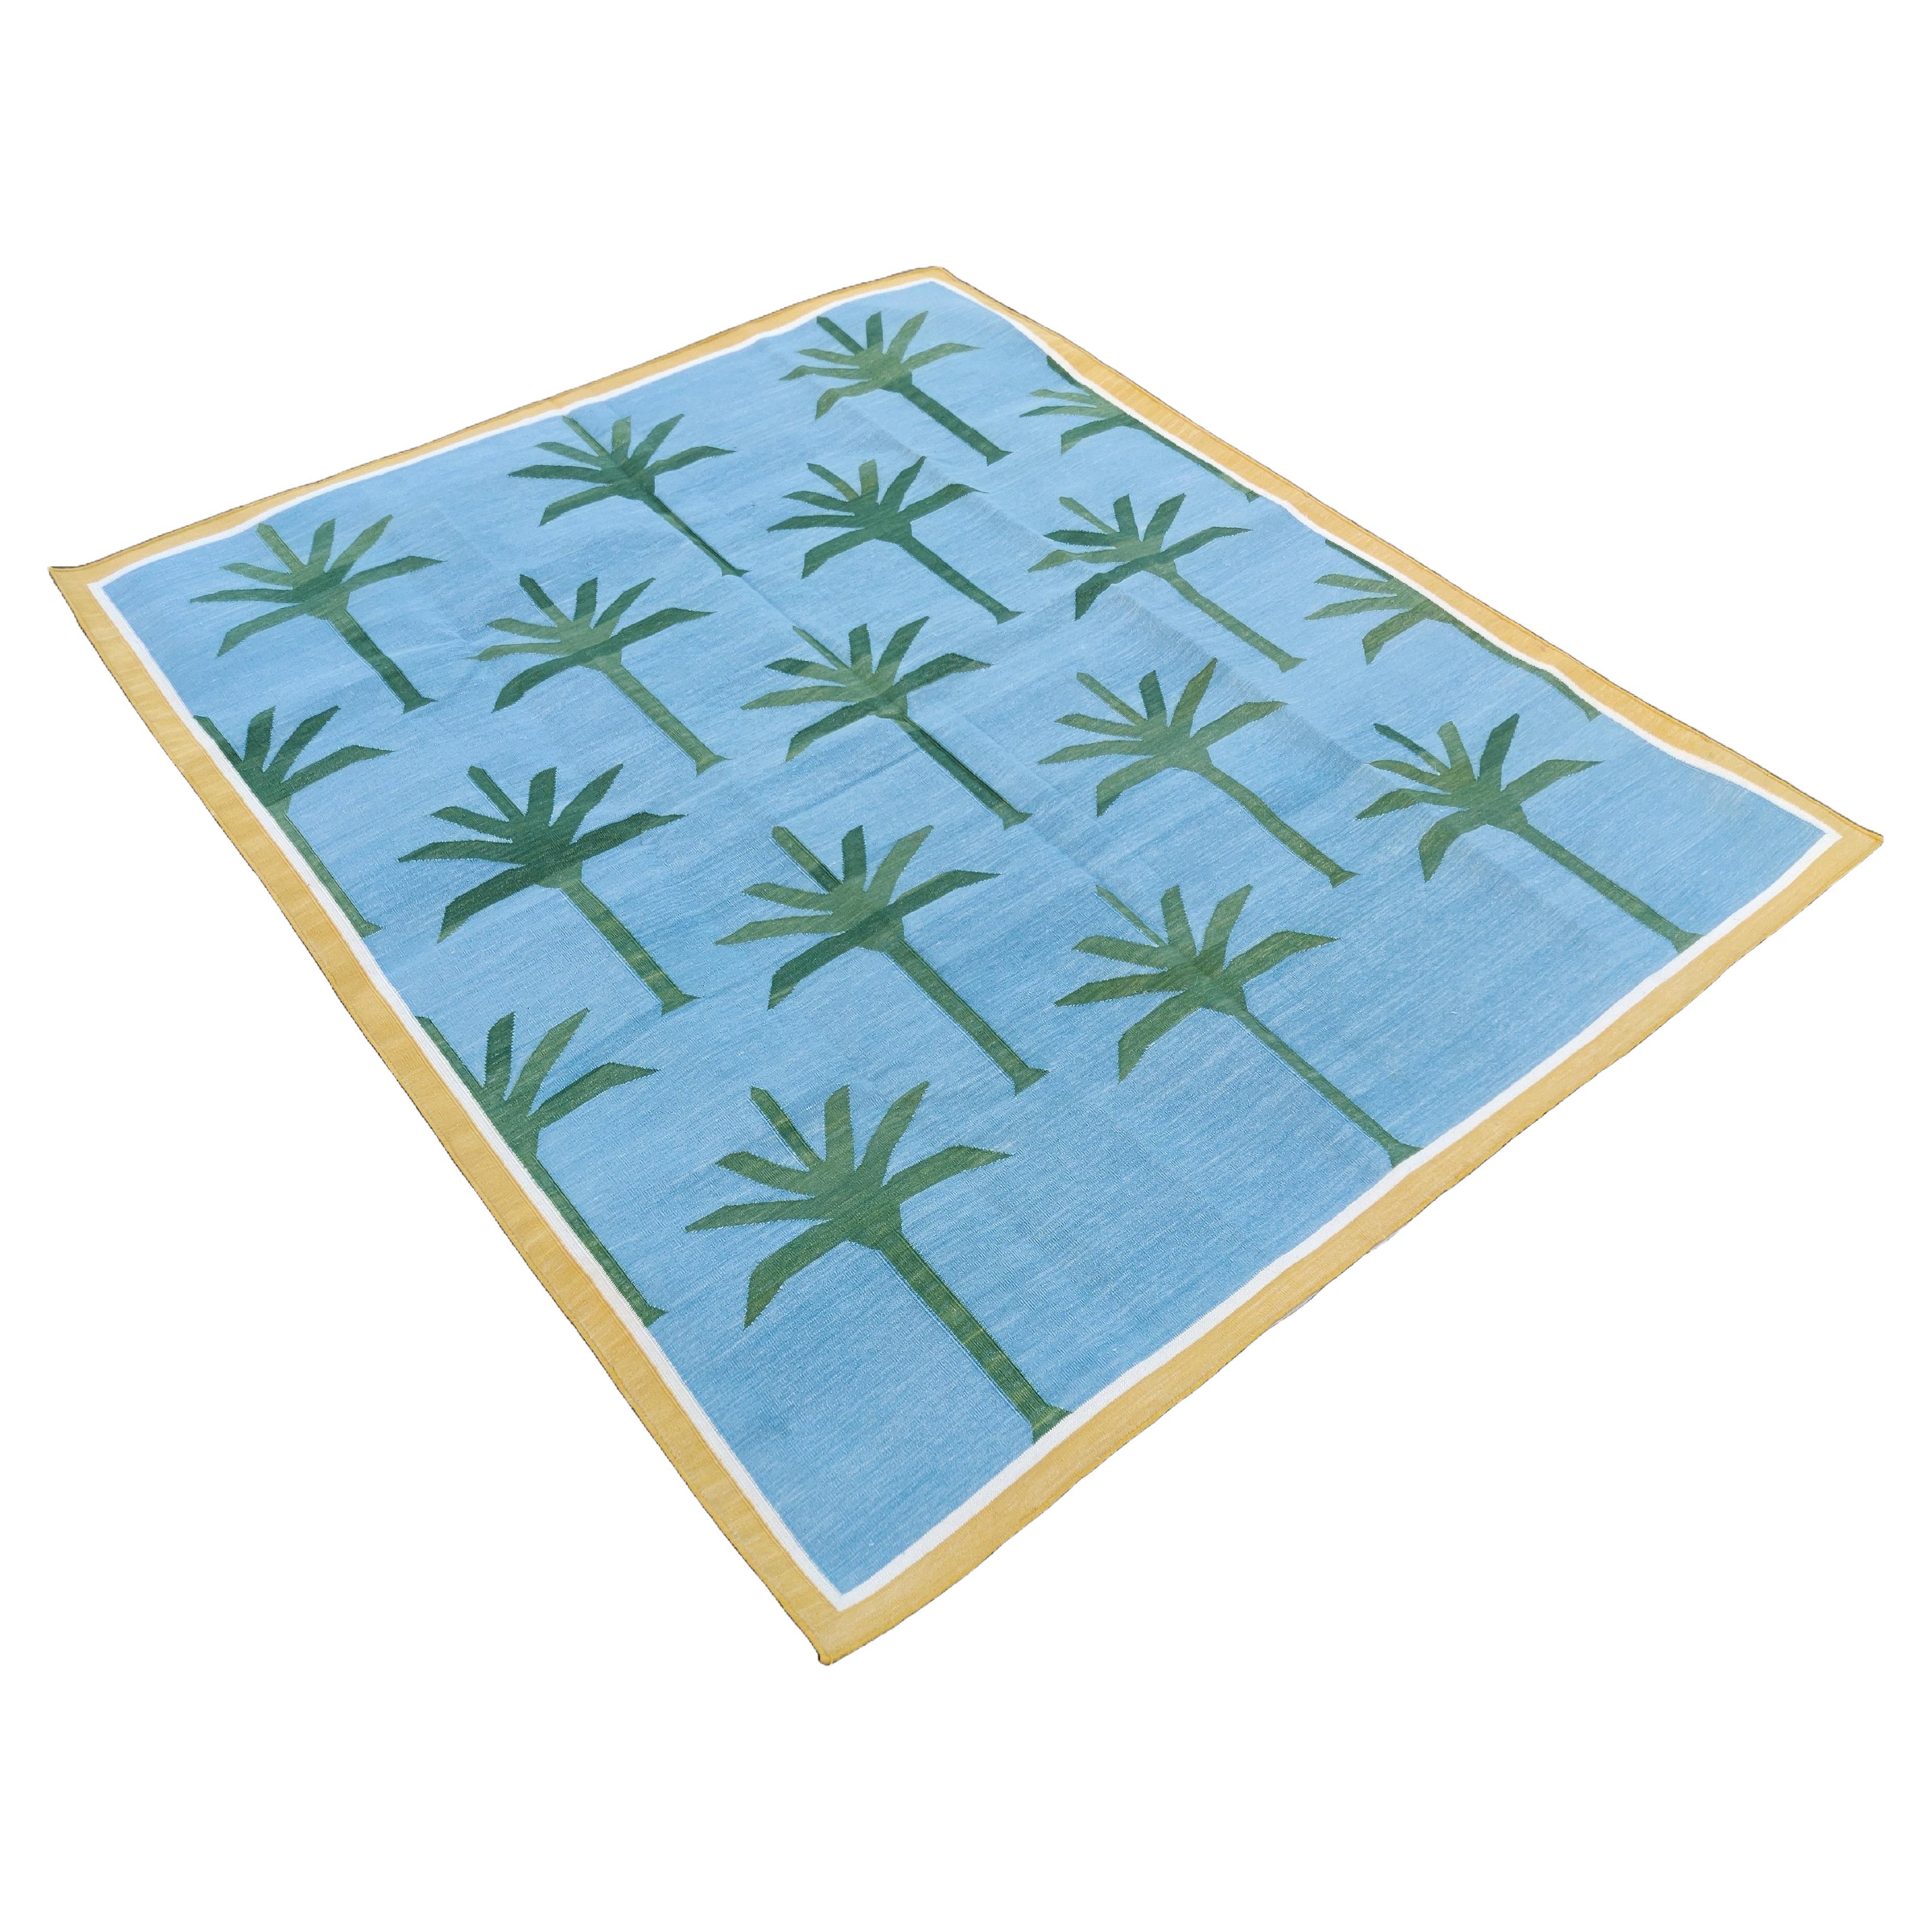 Handmade Cotton Area Flat Weave Rug, 5x7 Blue And Green Palm Tree Indian Dhurrie For Sale